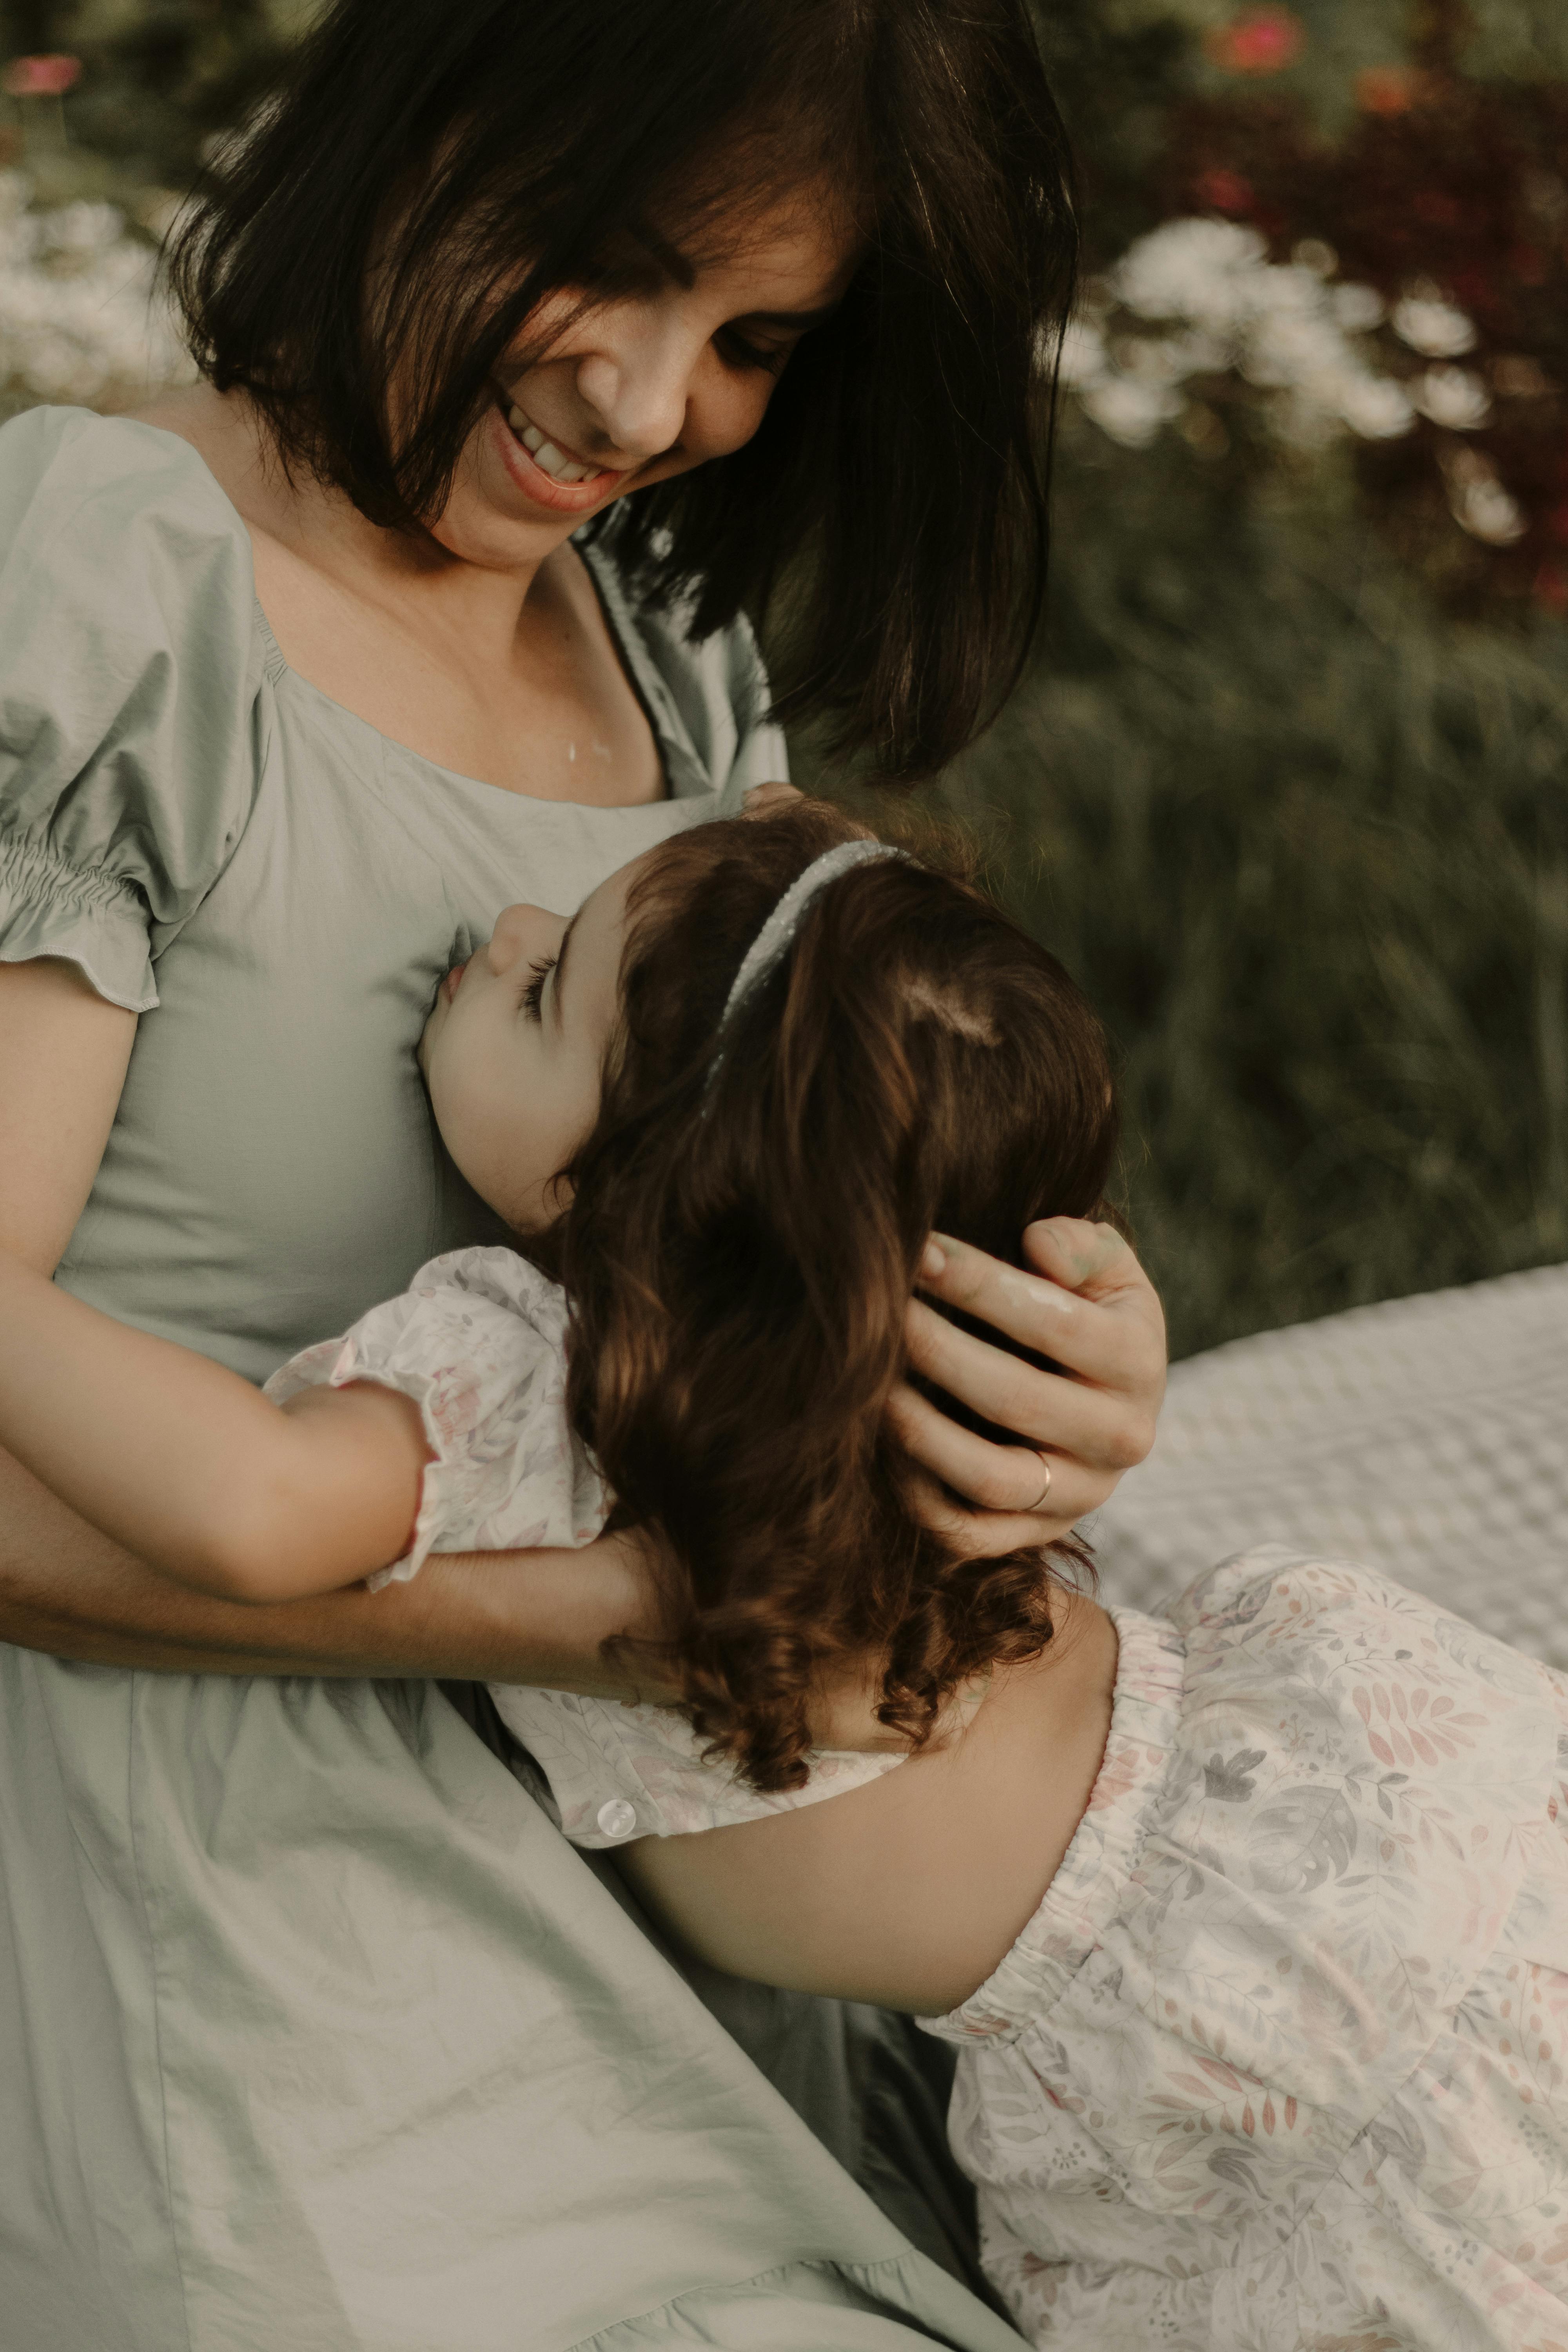 Mother and daughter bonding. | Source: Pexels